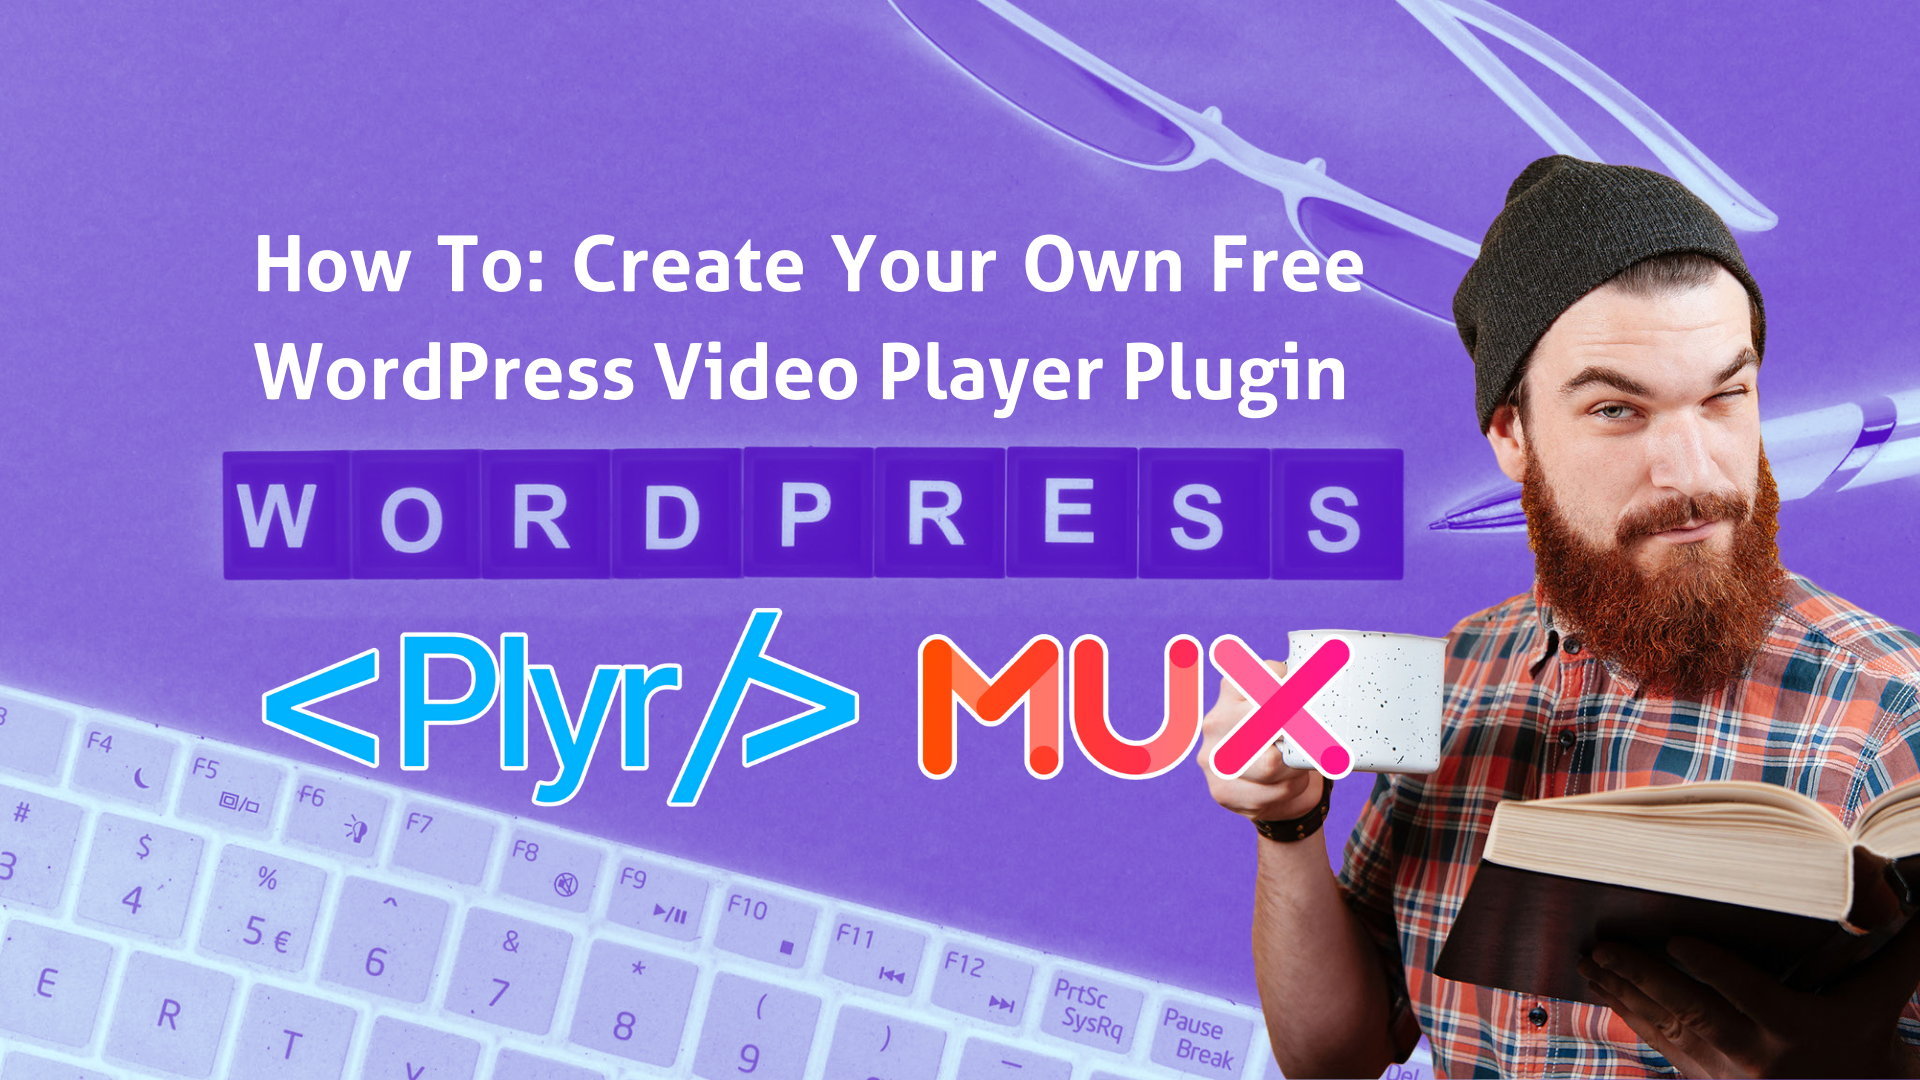 How To Create Your Own Free WordPress Video Player Plugin